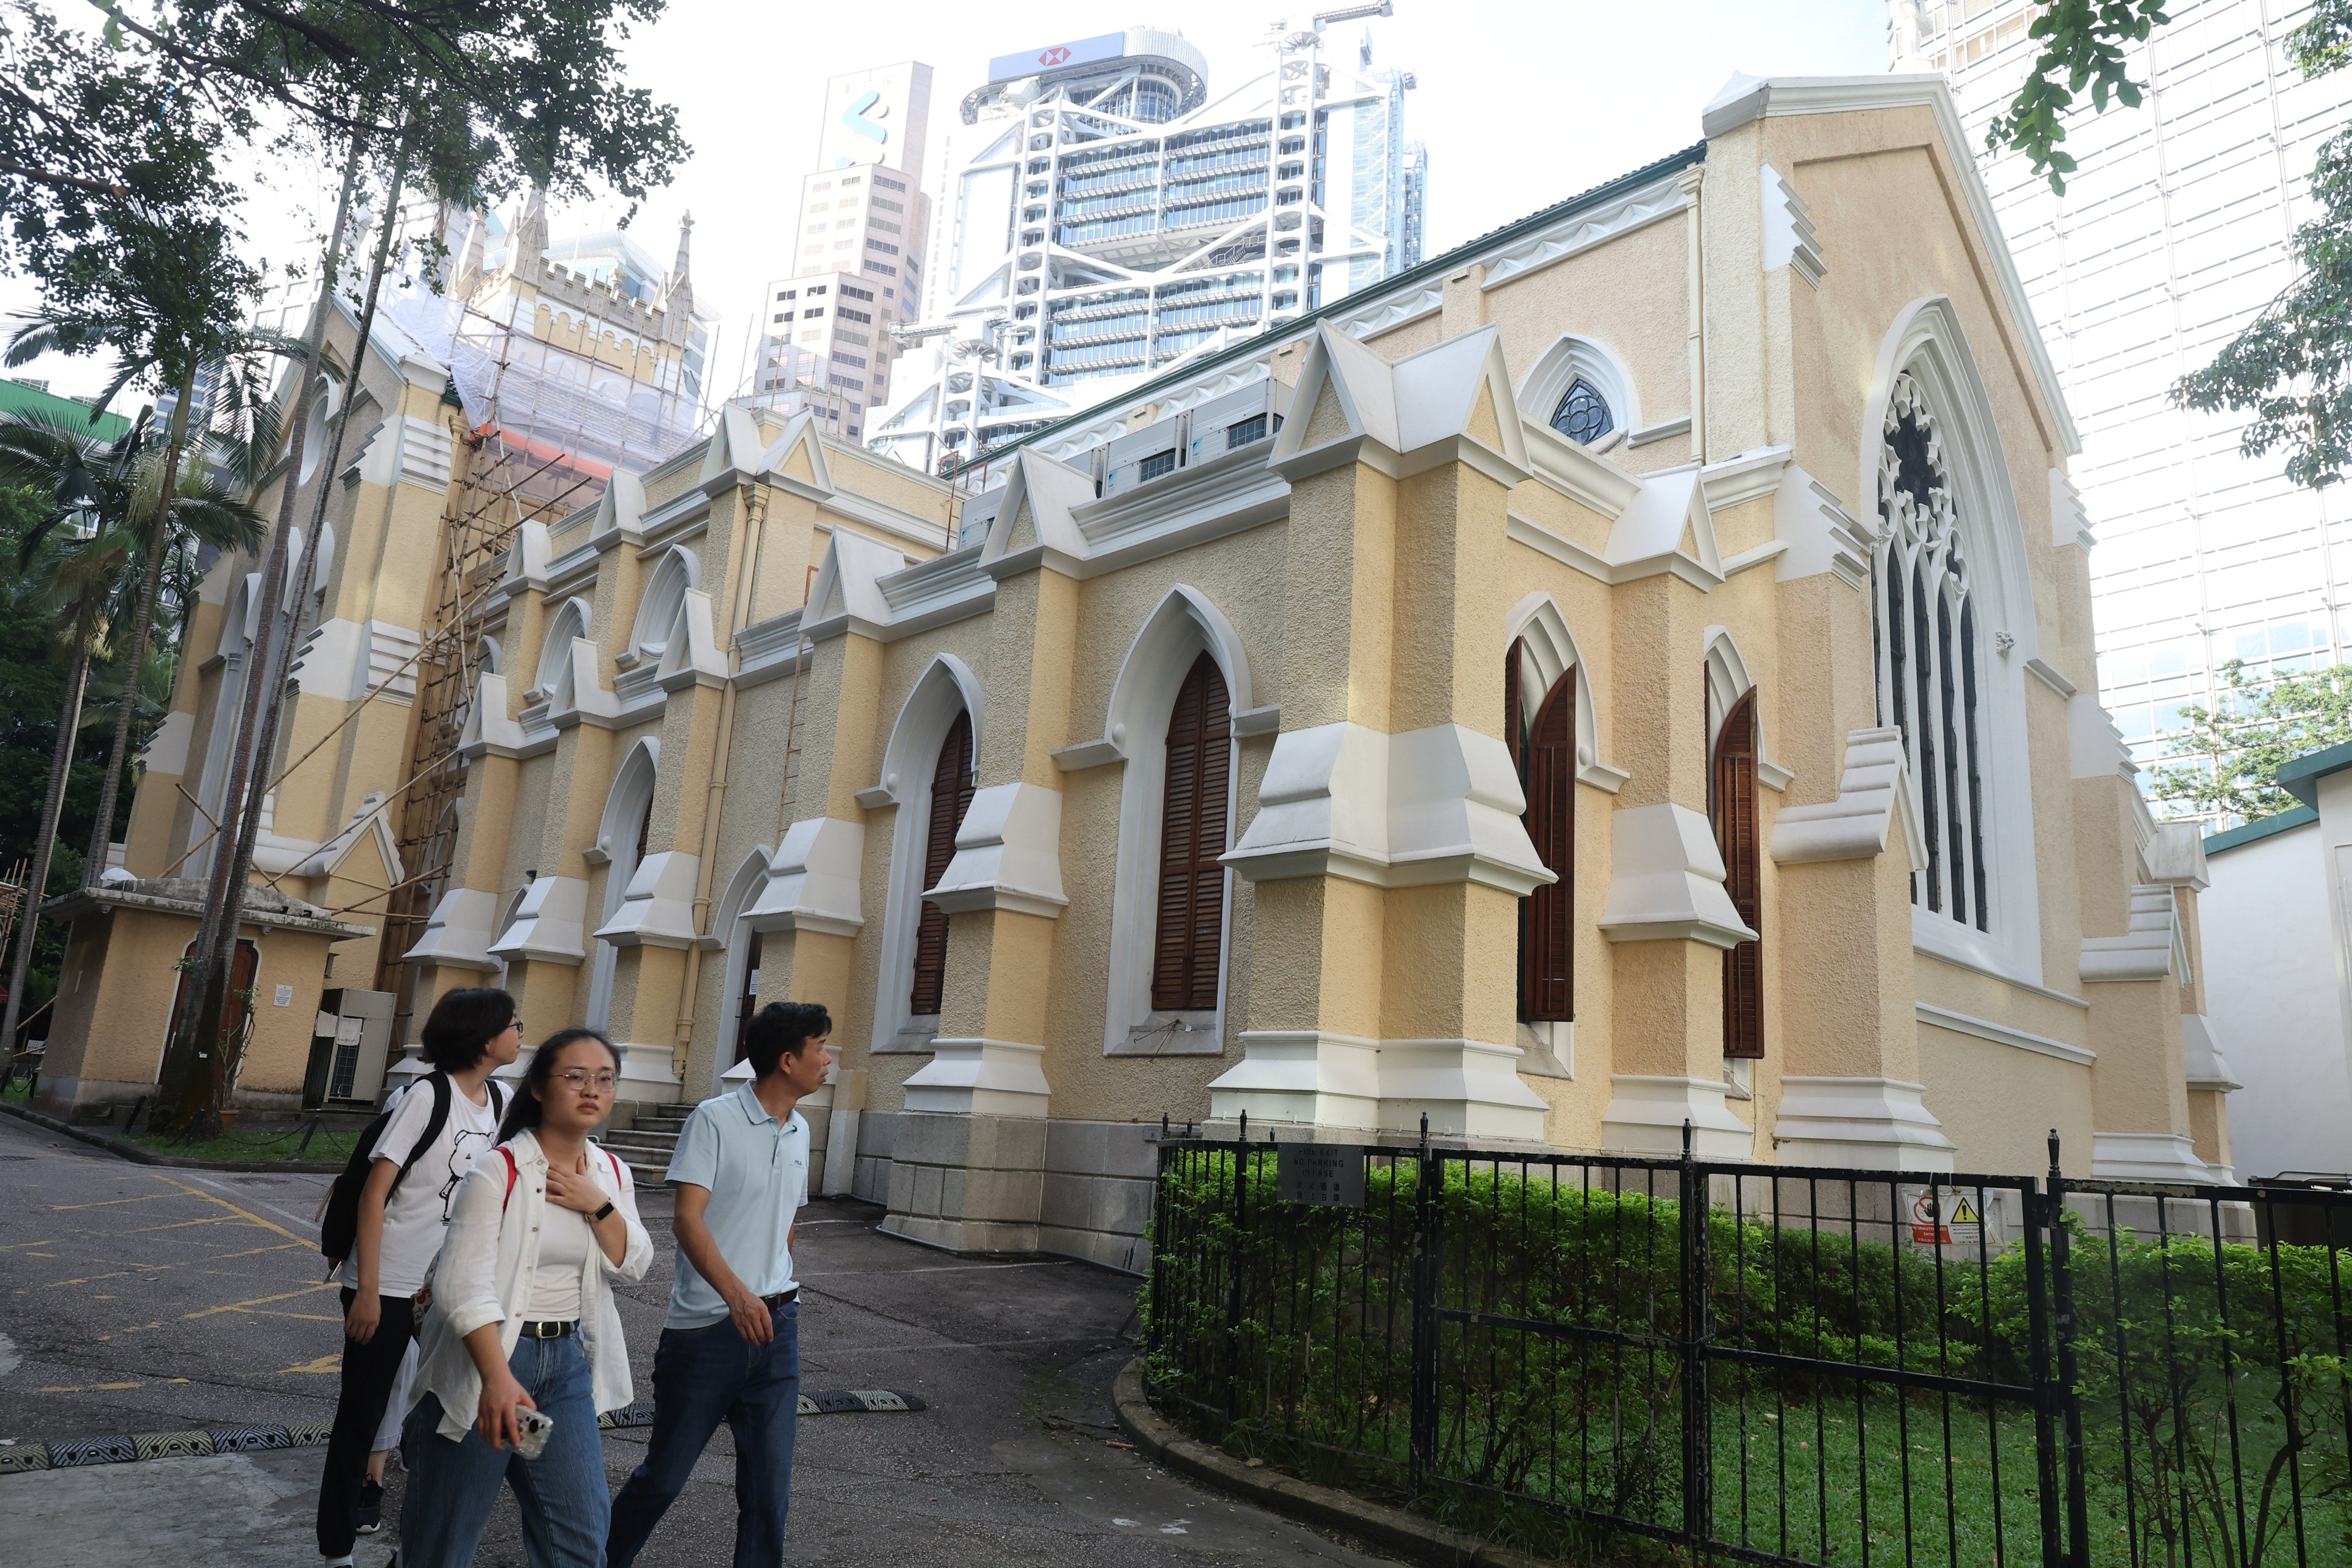 St John’s Cathedral in Central. The US report cited a paper by Freedom House, which downgraded Hong Kong’s freedom of expression and belief rating from the highest score 4 in 2022 to 3 in 2023. Photo: Edmond So